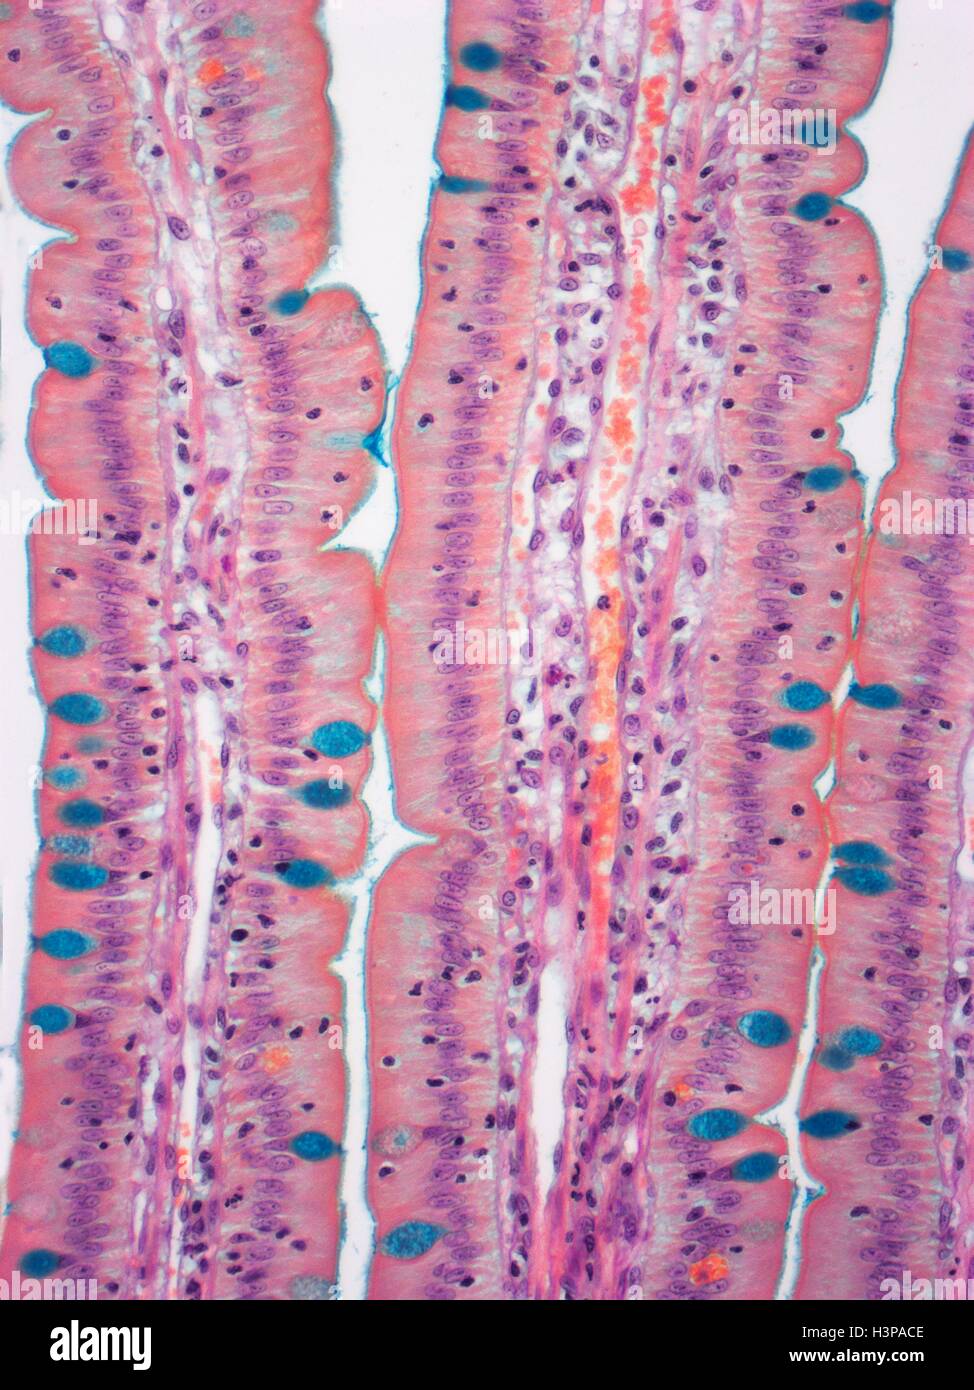 Small intestine. Light micrograph (LM) of a section through the finger-like projections (villi) of the duodenum, the uppermost part of the small intestine. These increase the surface area for the absorption of food. Within the columnar epithelium of the outer surface (pink) are goblet cells (stained blue with special staining), which secrete mucus to lubricate food and prevent self-digestion. The lamina propria (central core, ) contains the blood supply that transports the products of digestion. Magnification: x350 when printed at 10 centimetres wide. Stock Photo